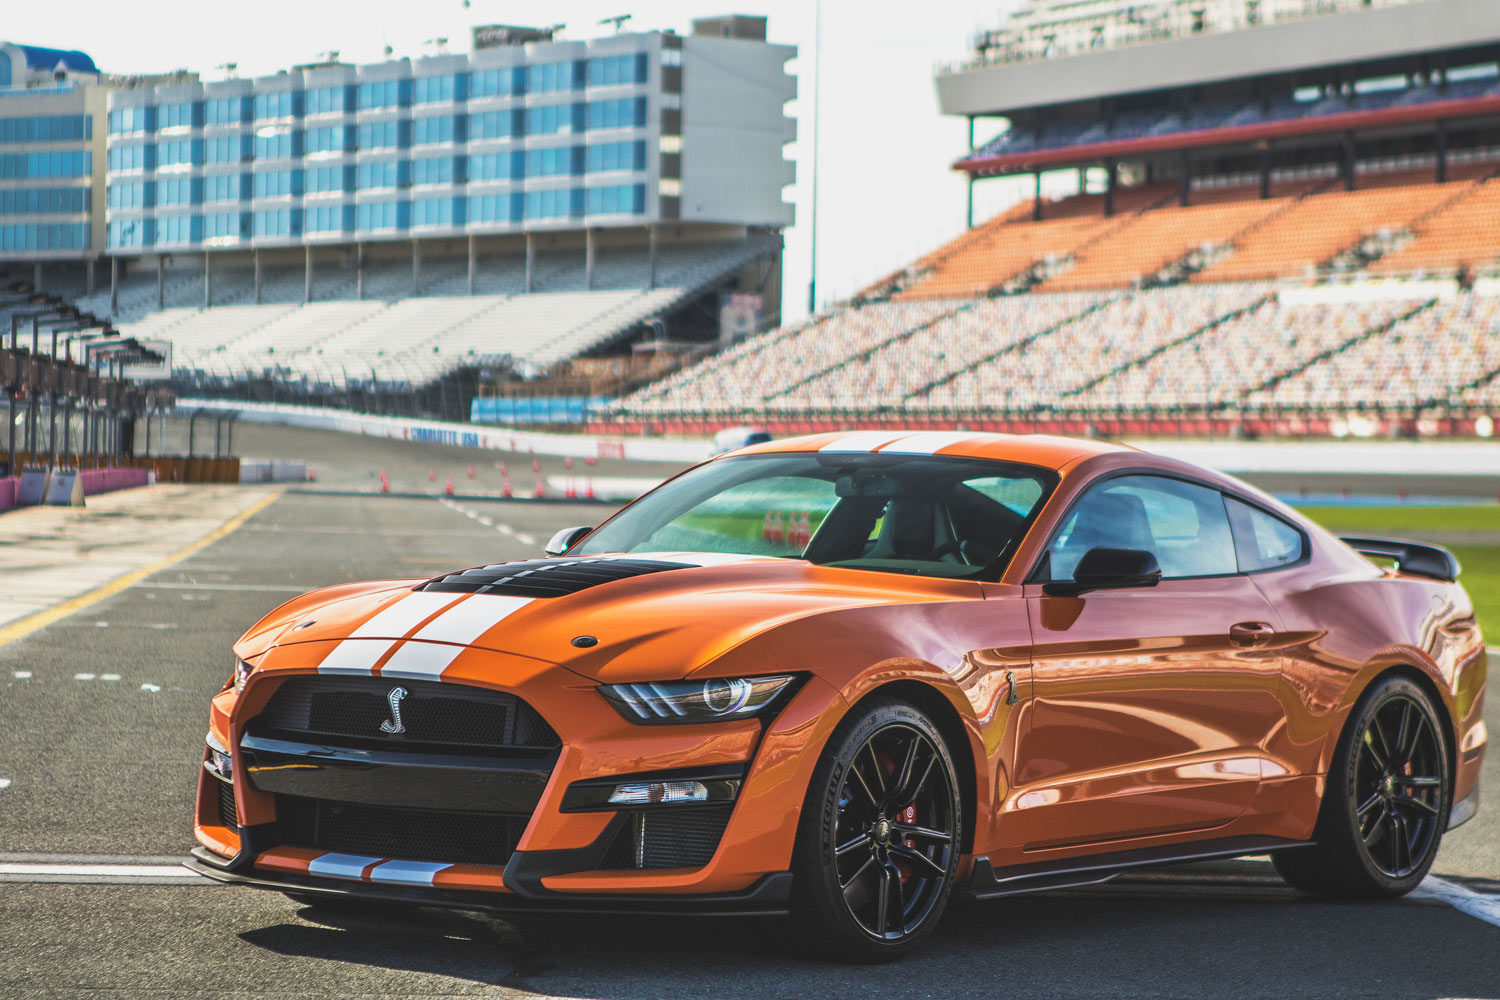 2020 Ford Mustang Shelby GT500 in orange with white stripes parked on a racetrack